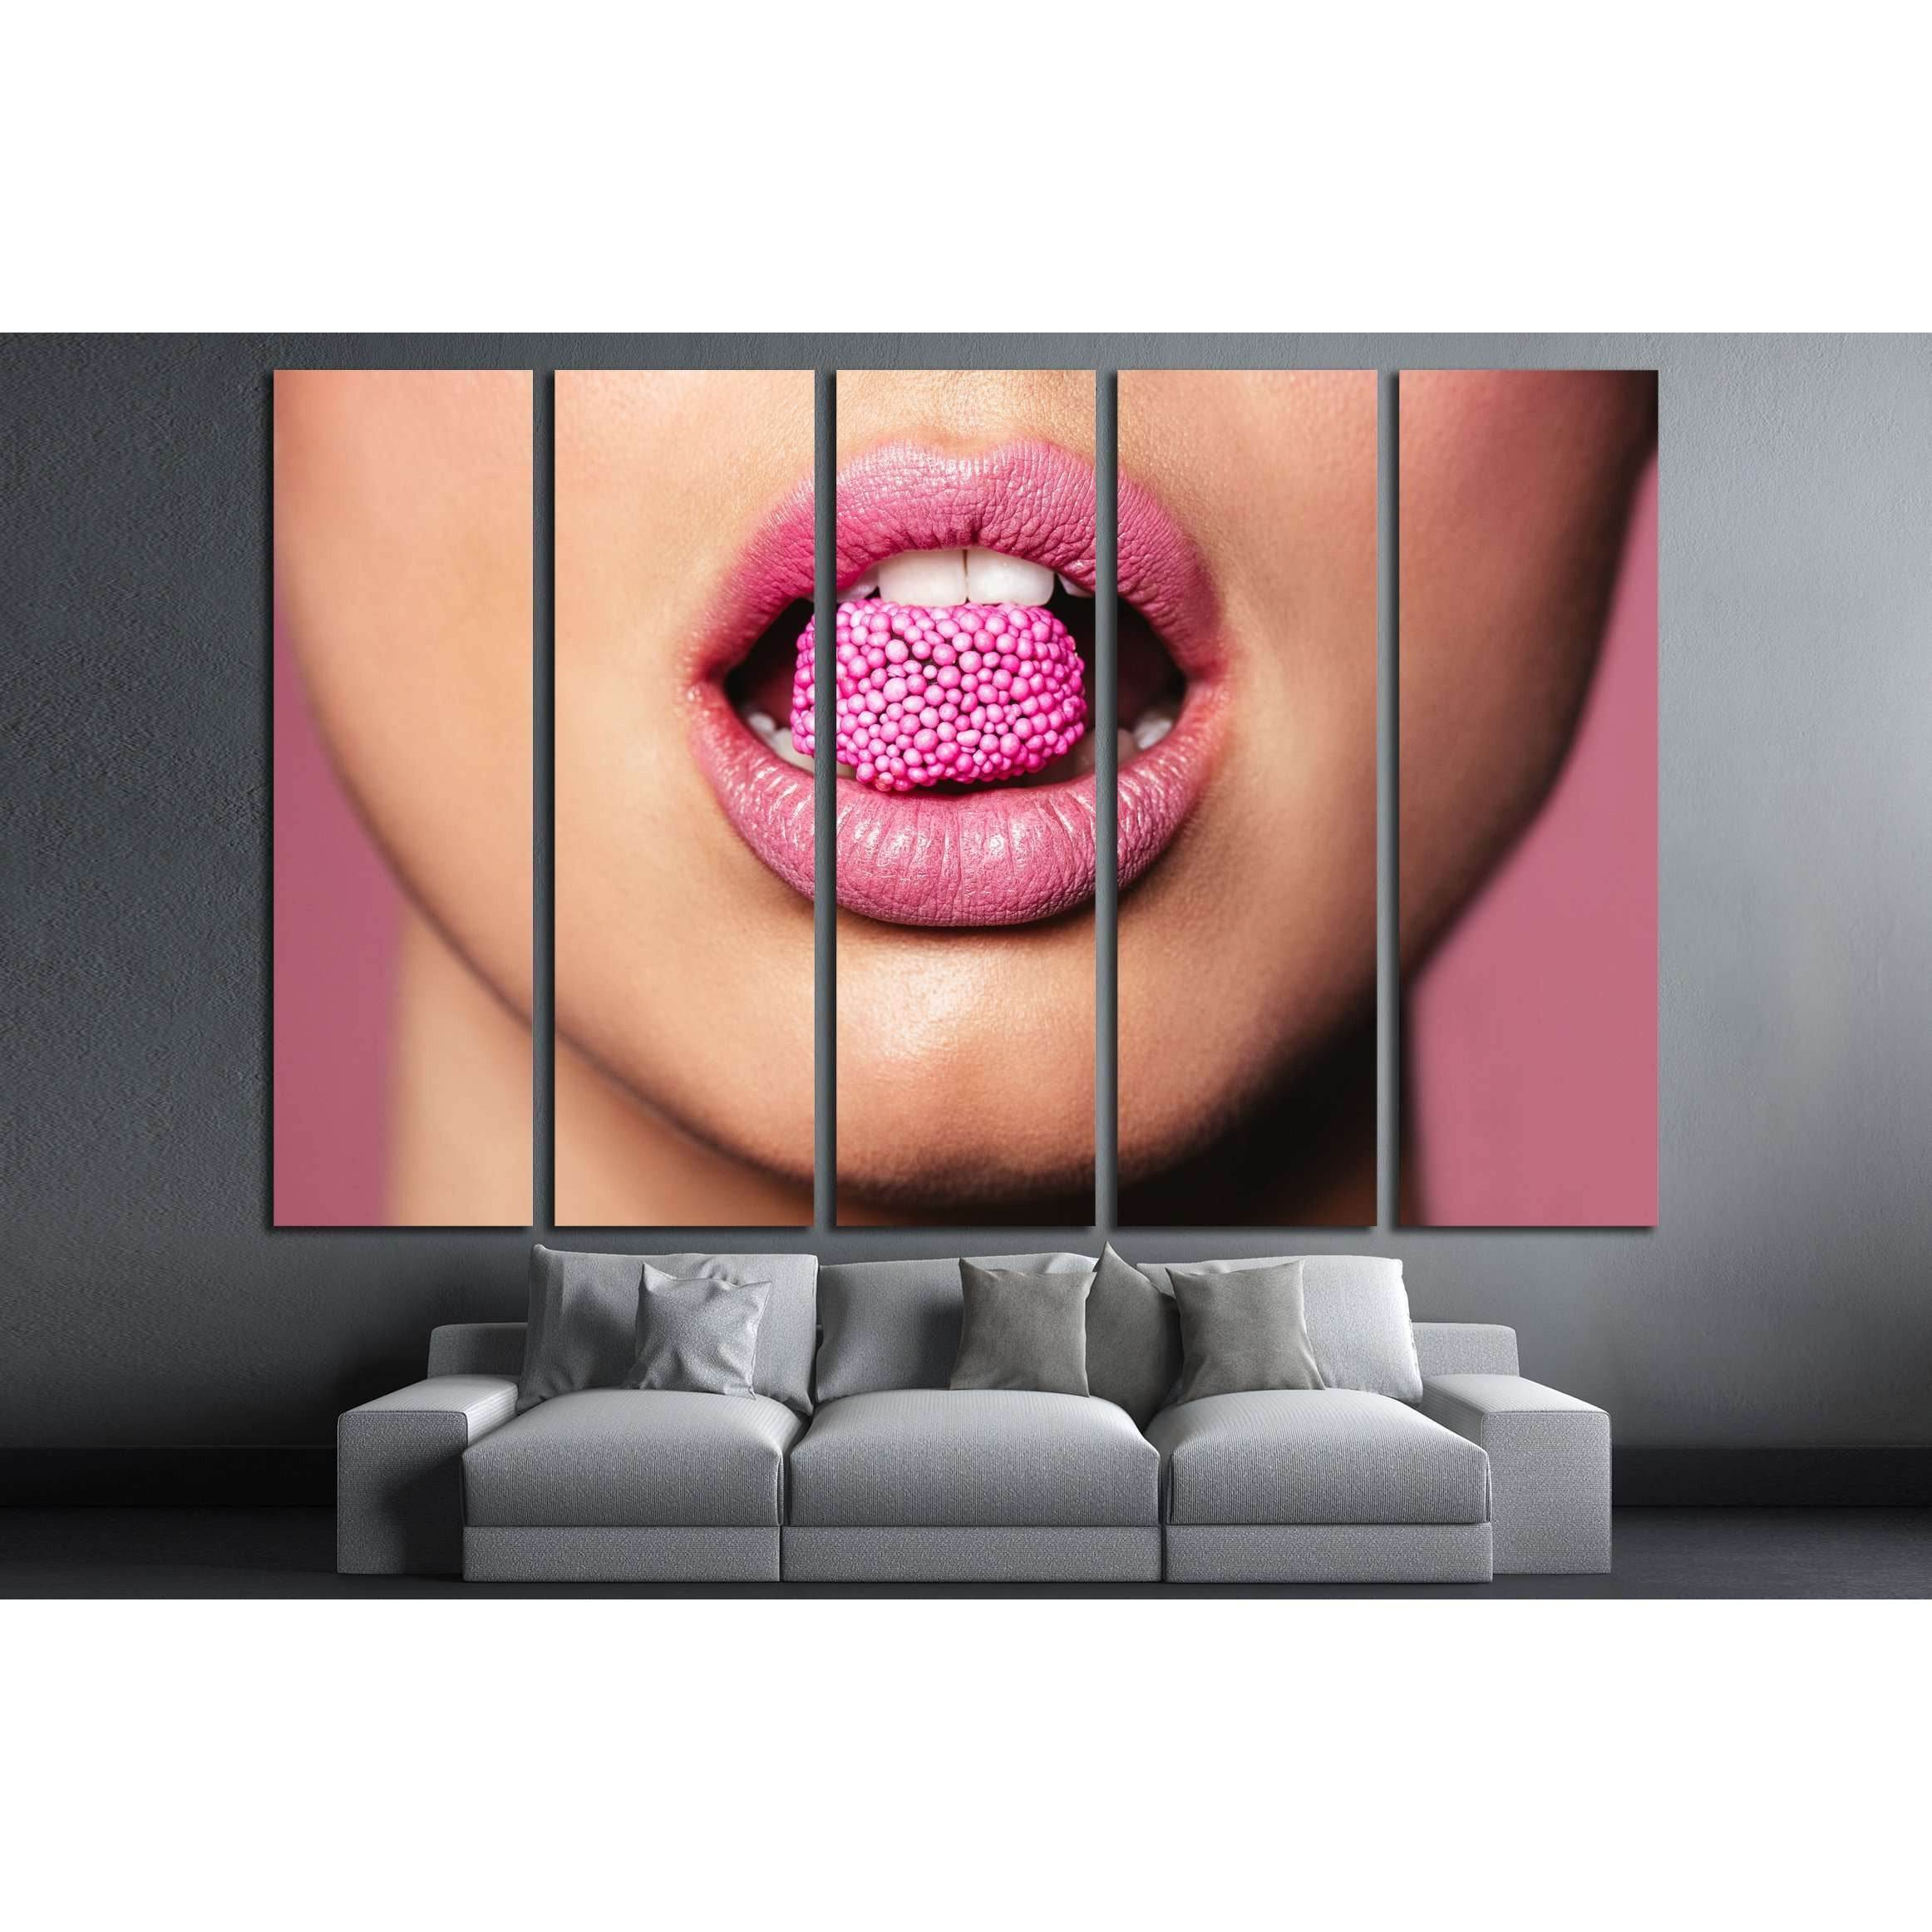 Beauty Saloon Wall ArtDecorate your walls with a stunning Beauty Saloon Canvas Art Print from the world's largest art gallery. Choose from thousands of female artworks with various sizing options. Choose your perfect art print to complete your beauty salo